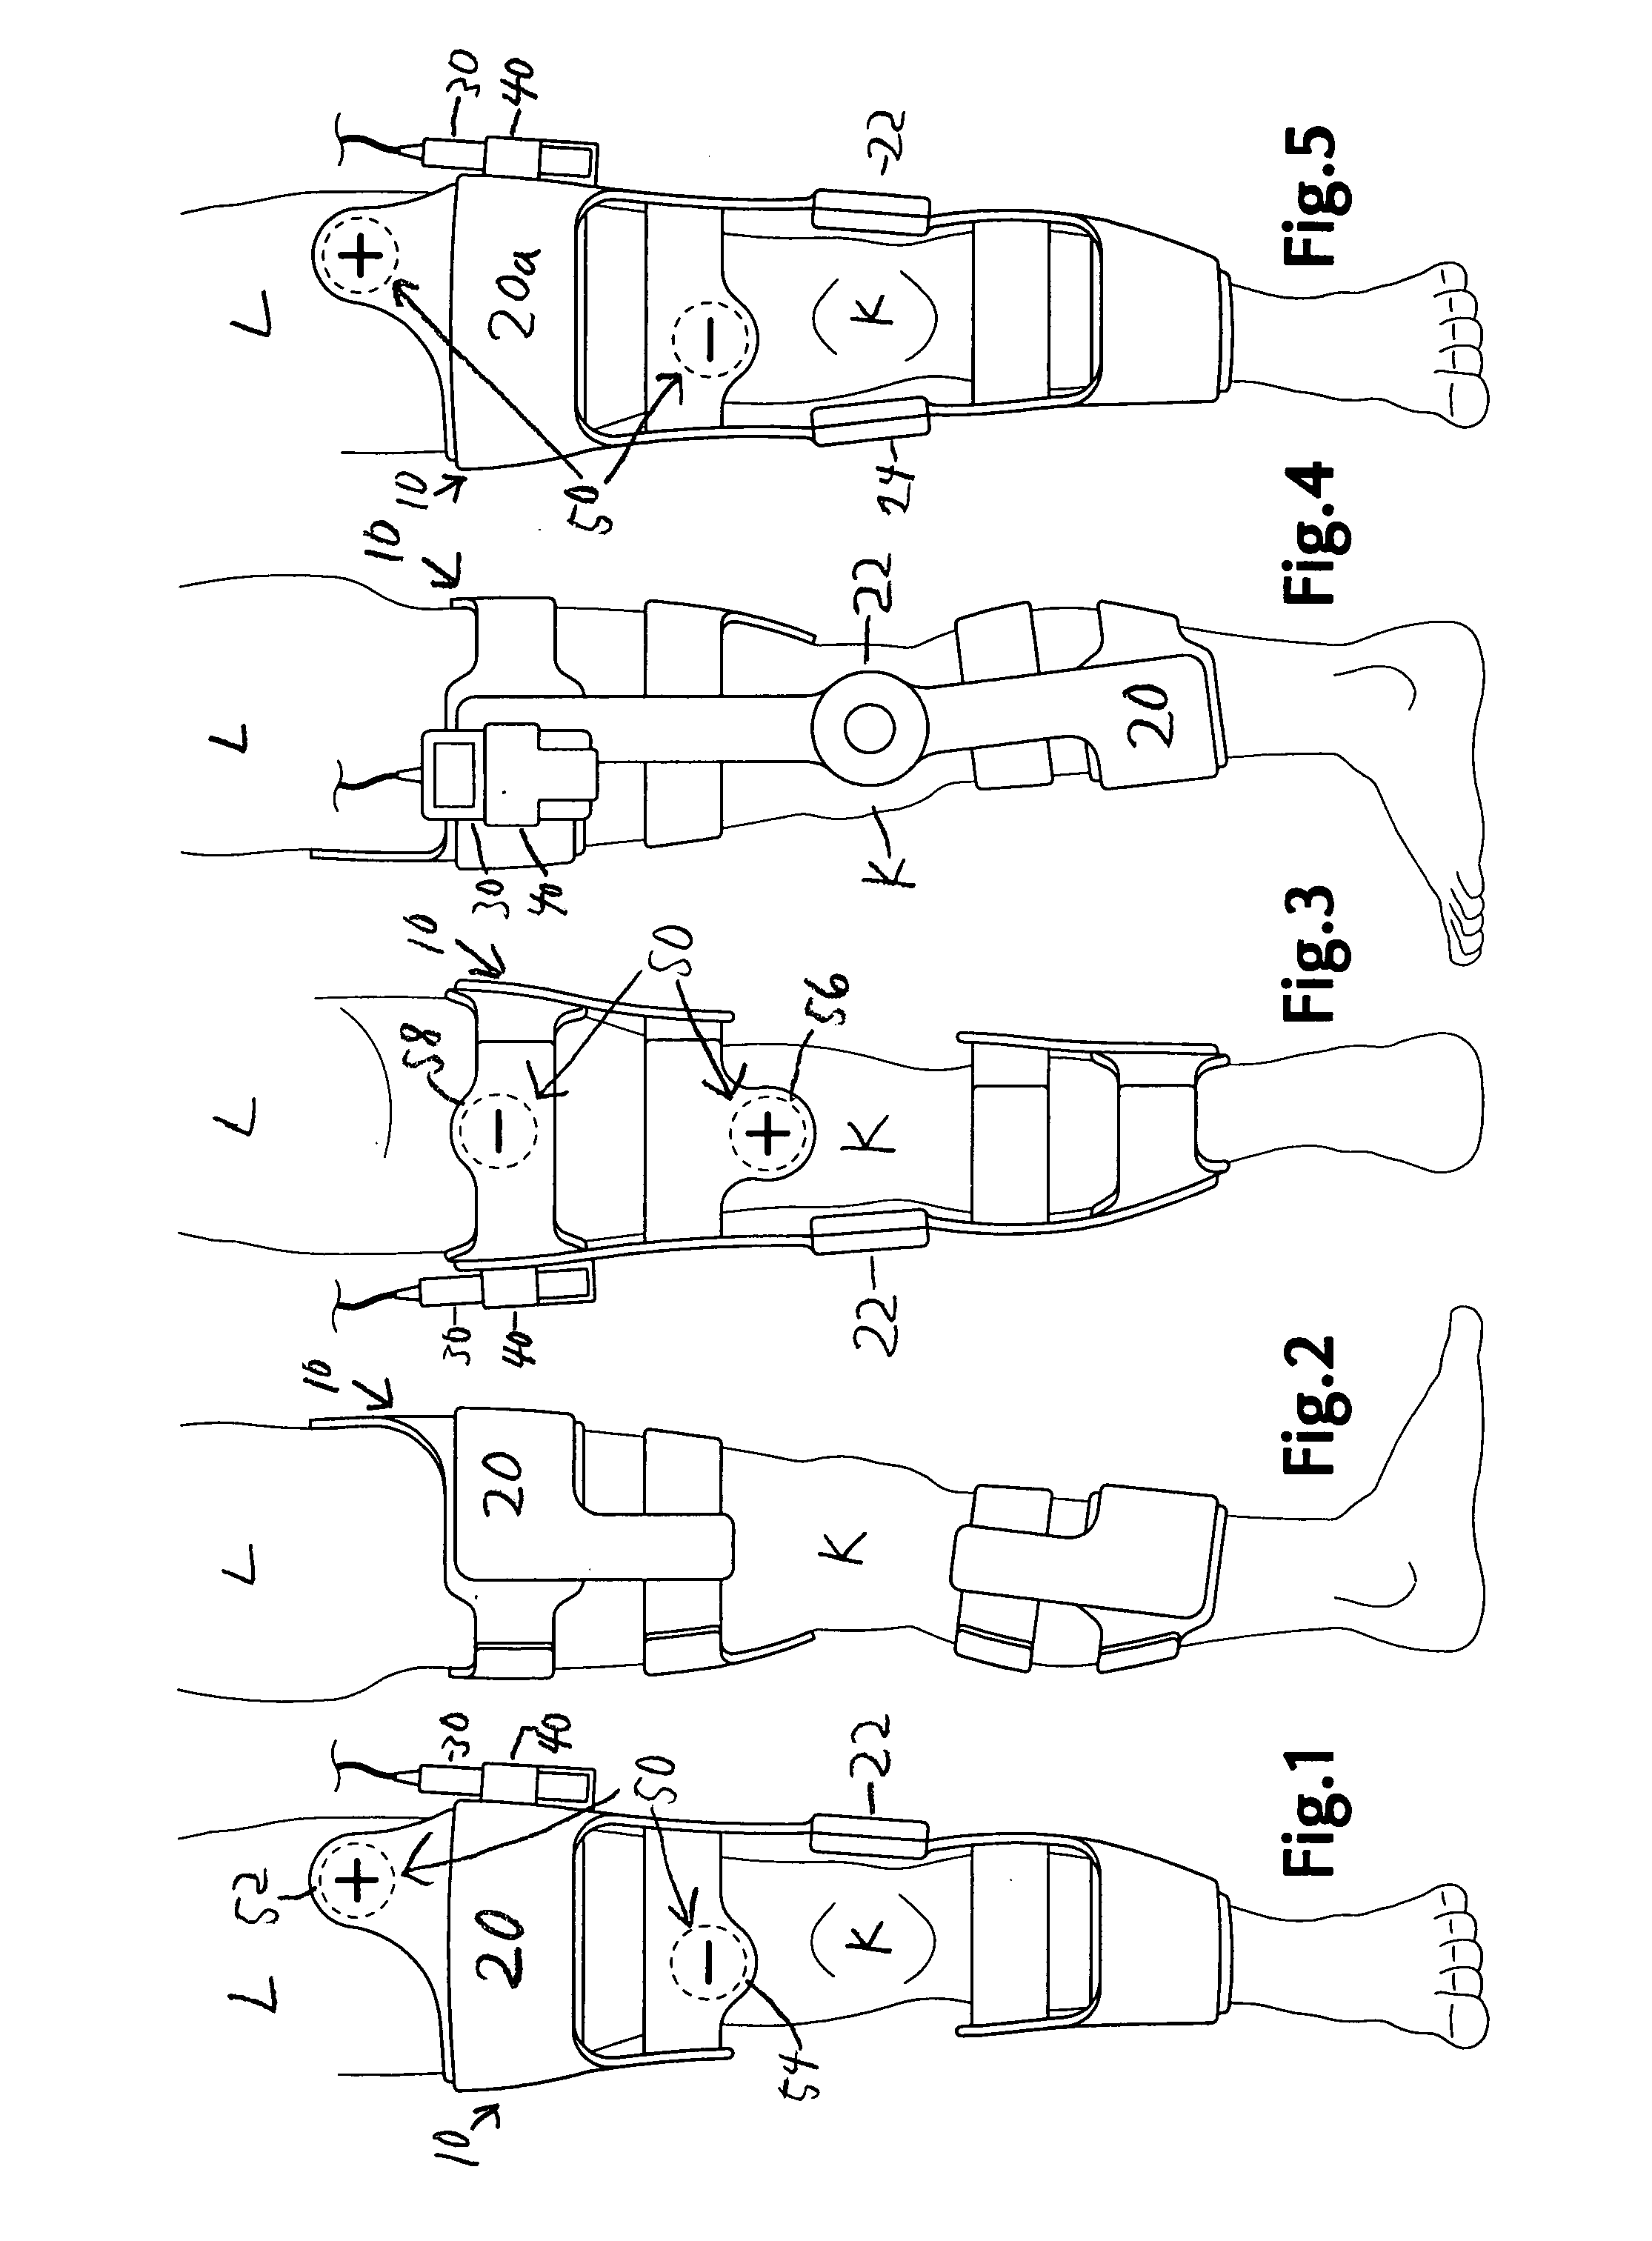 Apparatus for surface electrical stimulation and stabilization to treat disorders of the joints